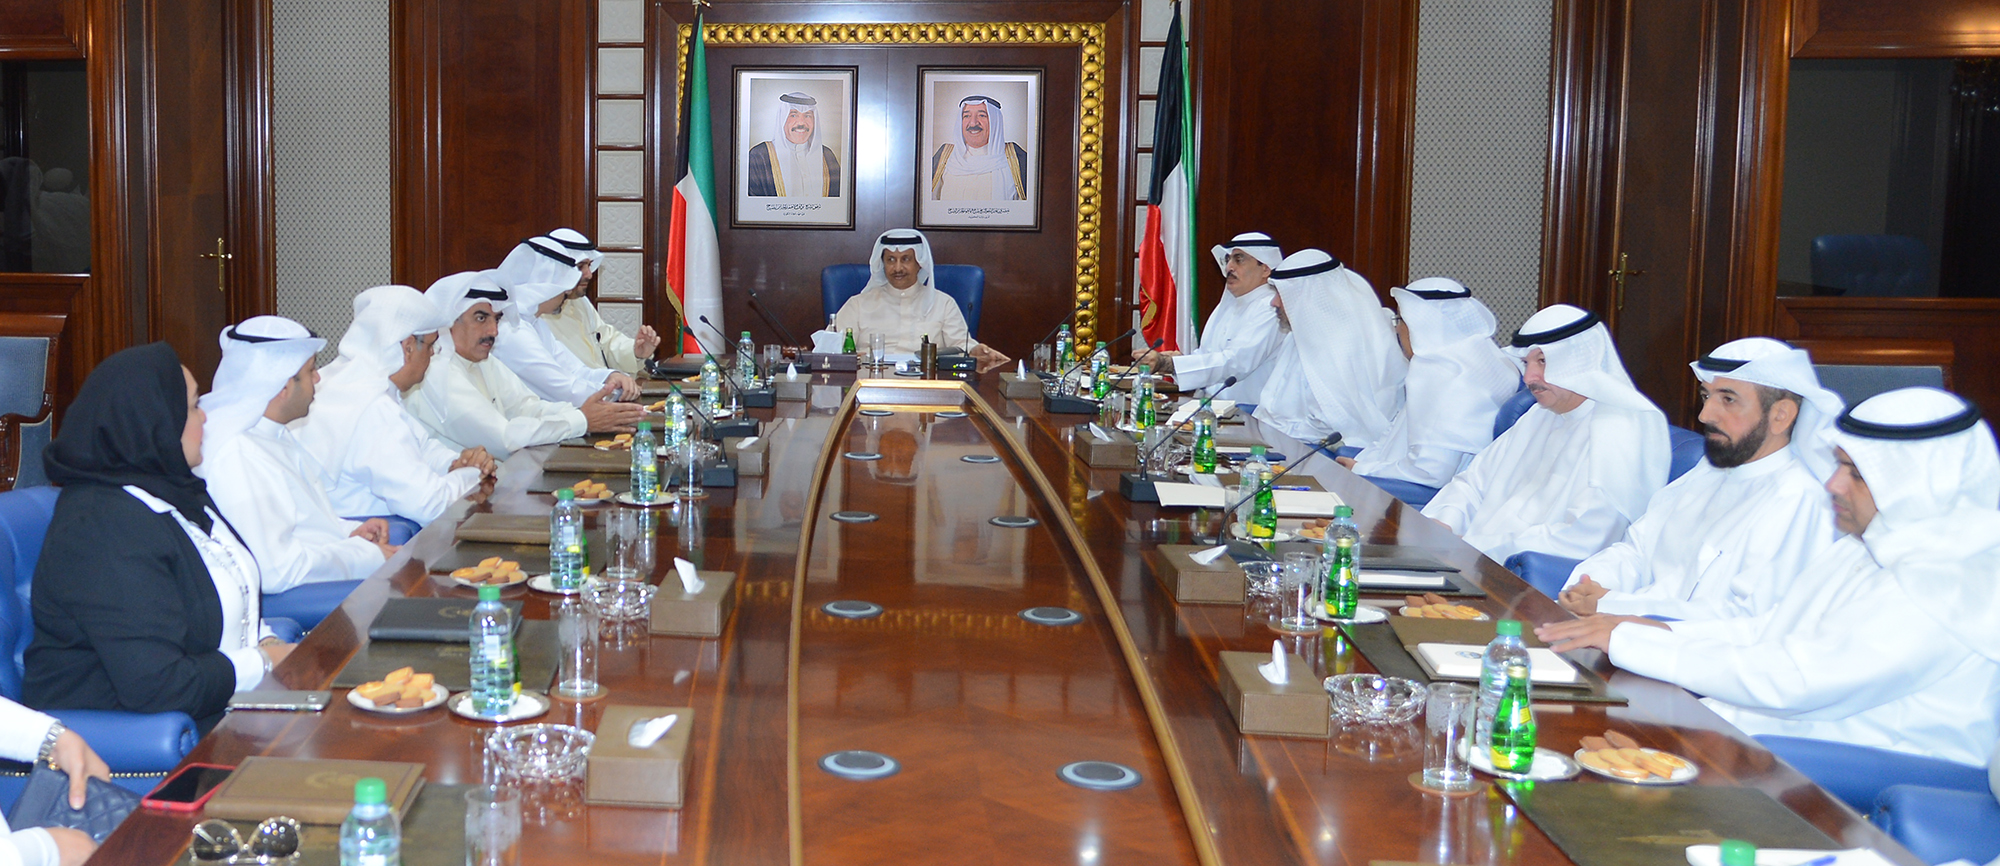 His Highness the Prime Minister Sheikh Jaber Al-Mubarak Al-Hamad Al-Sabah receives head of the Permanent Committee for Streamlining Business Environment & Enhancing Competitiveness and its members